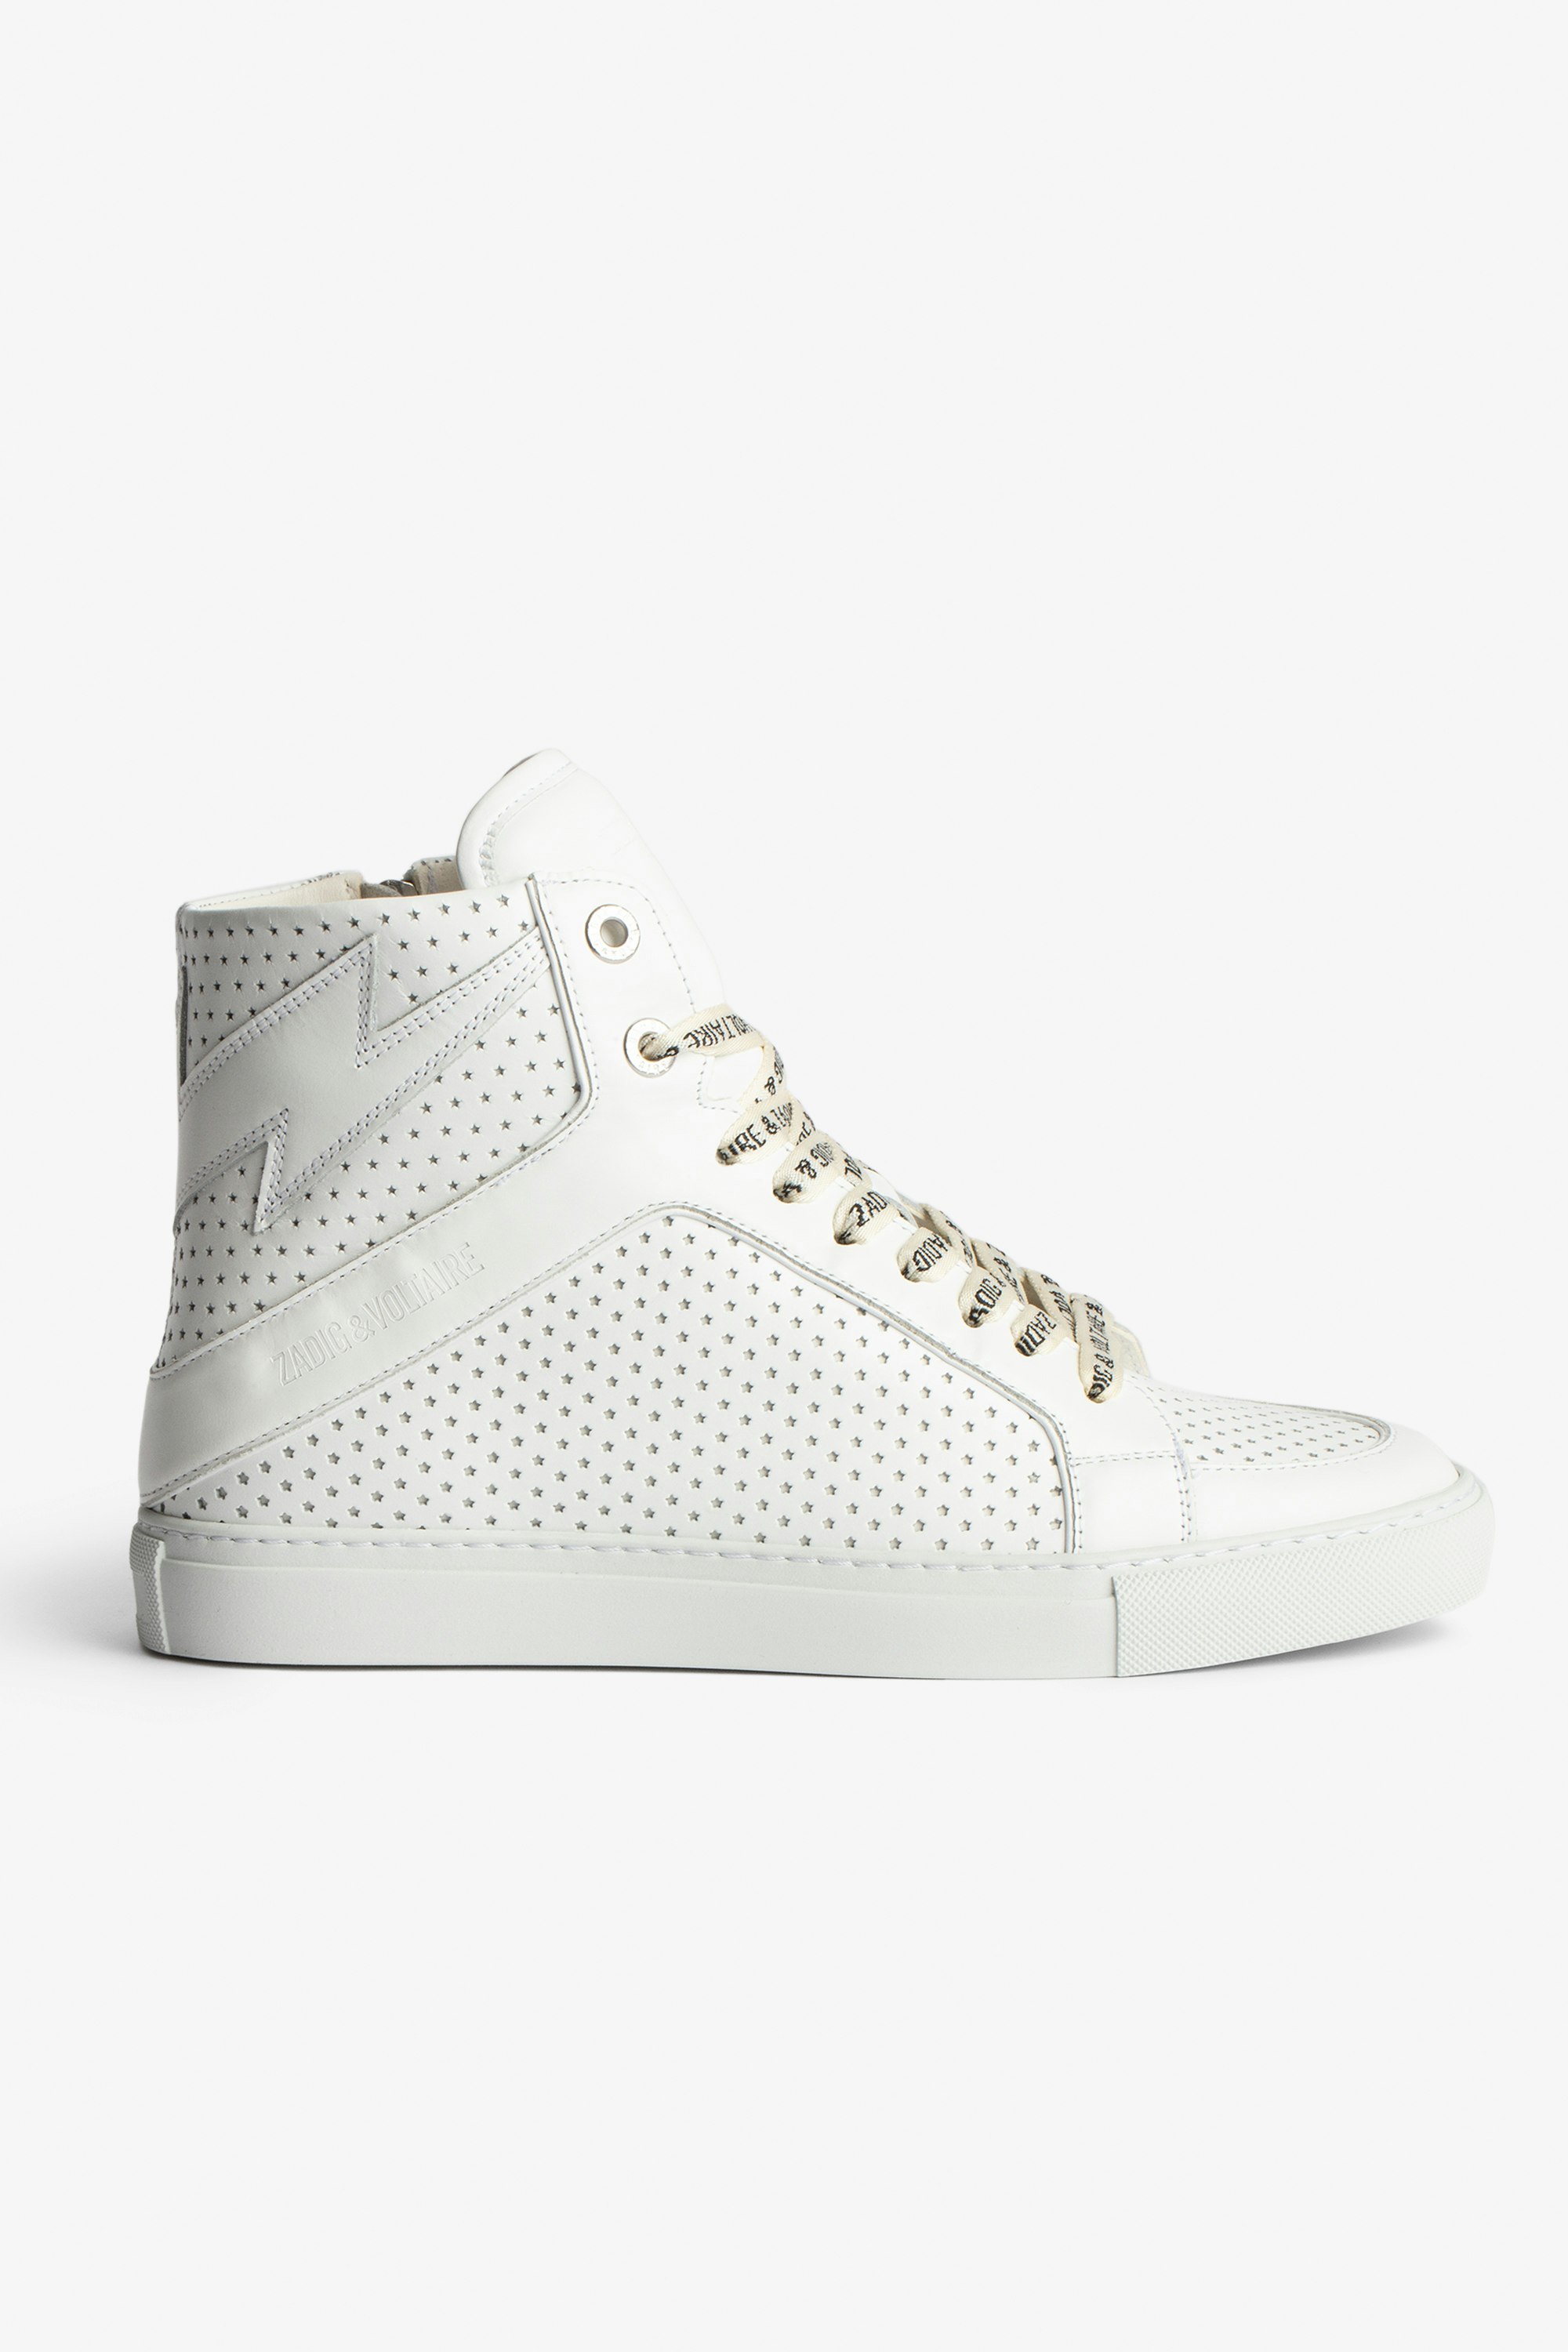 ZV1747 High Flash High-Top Trainers Women's high-top trainers in smooth white leather with perforated stars.